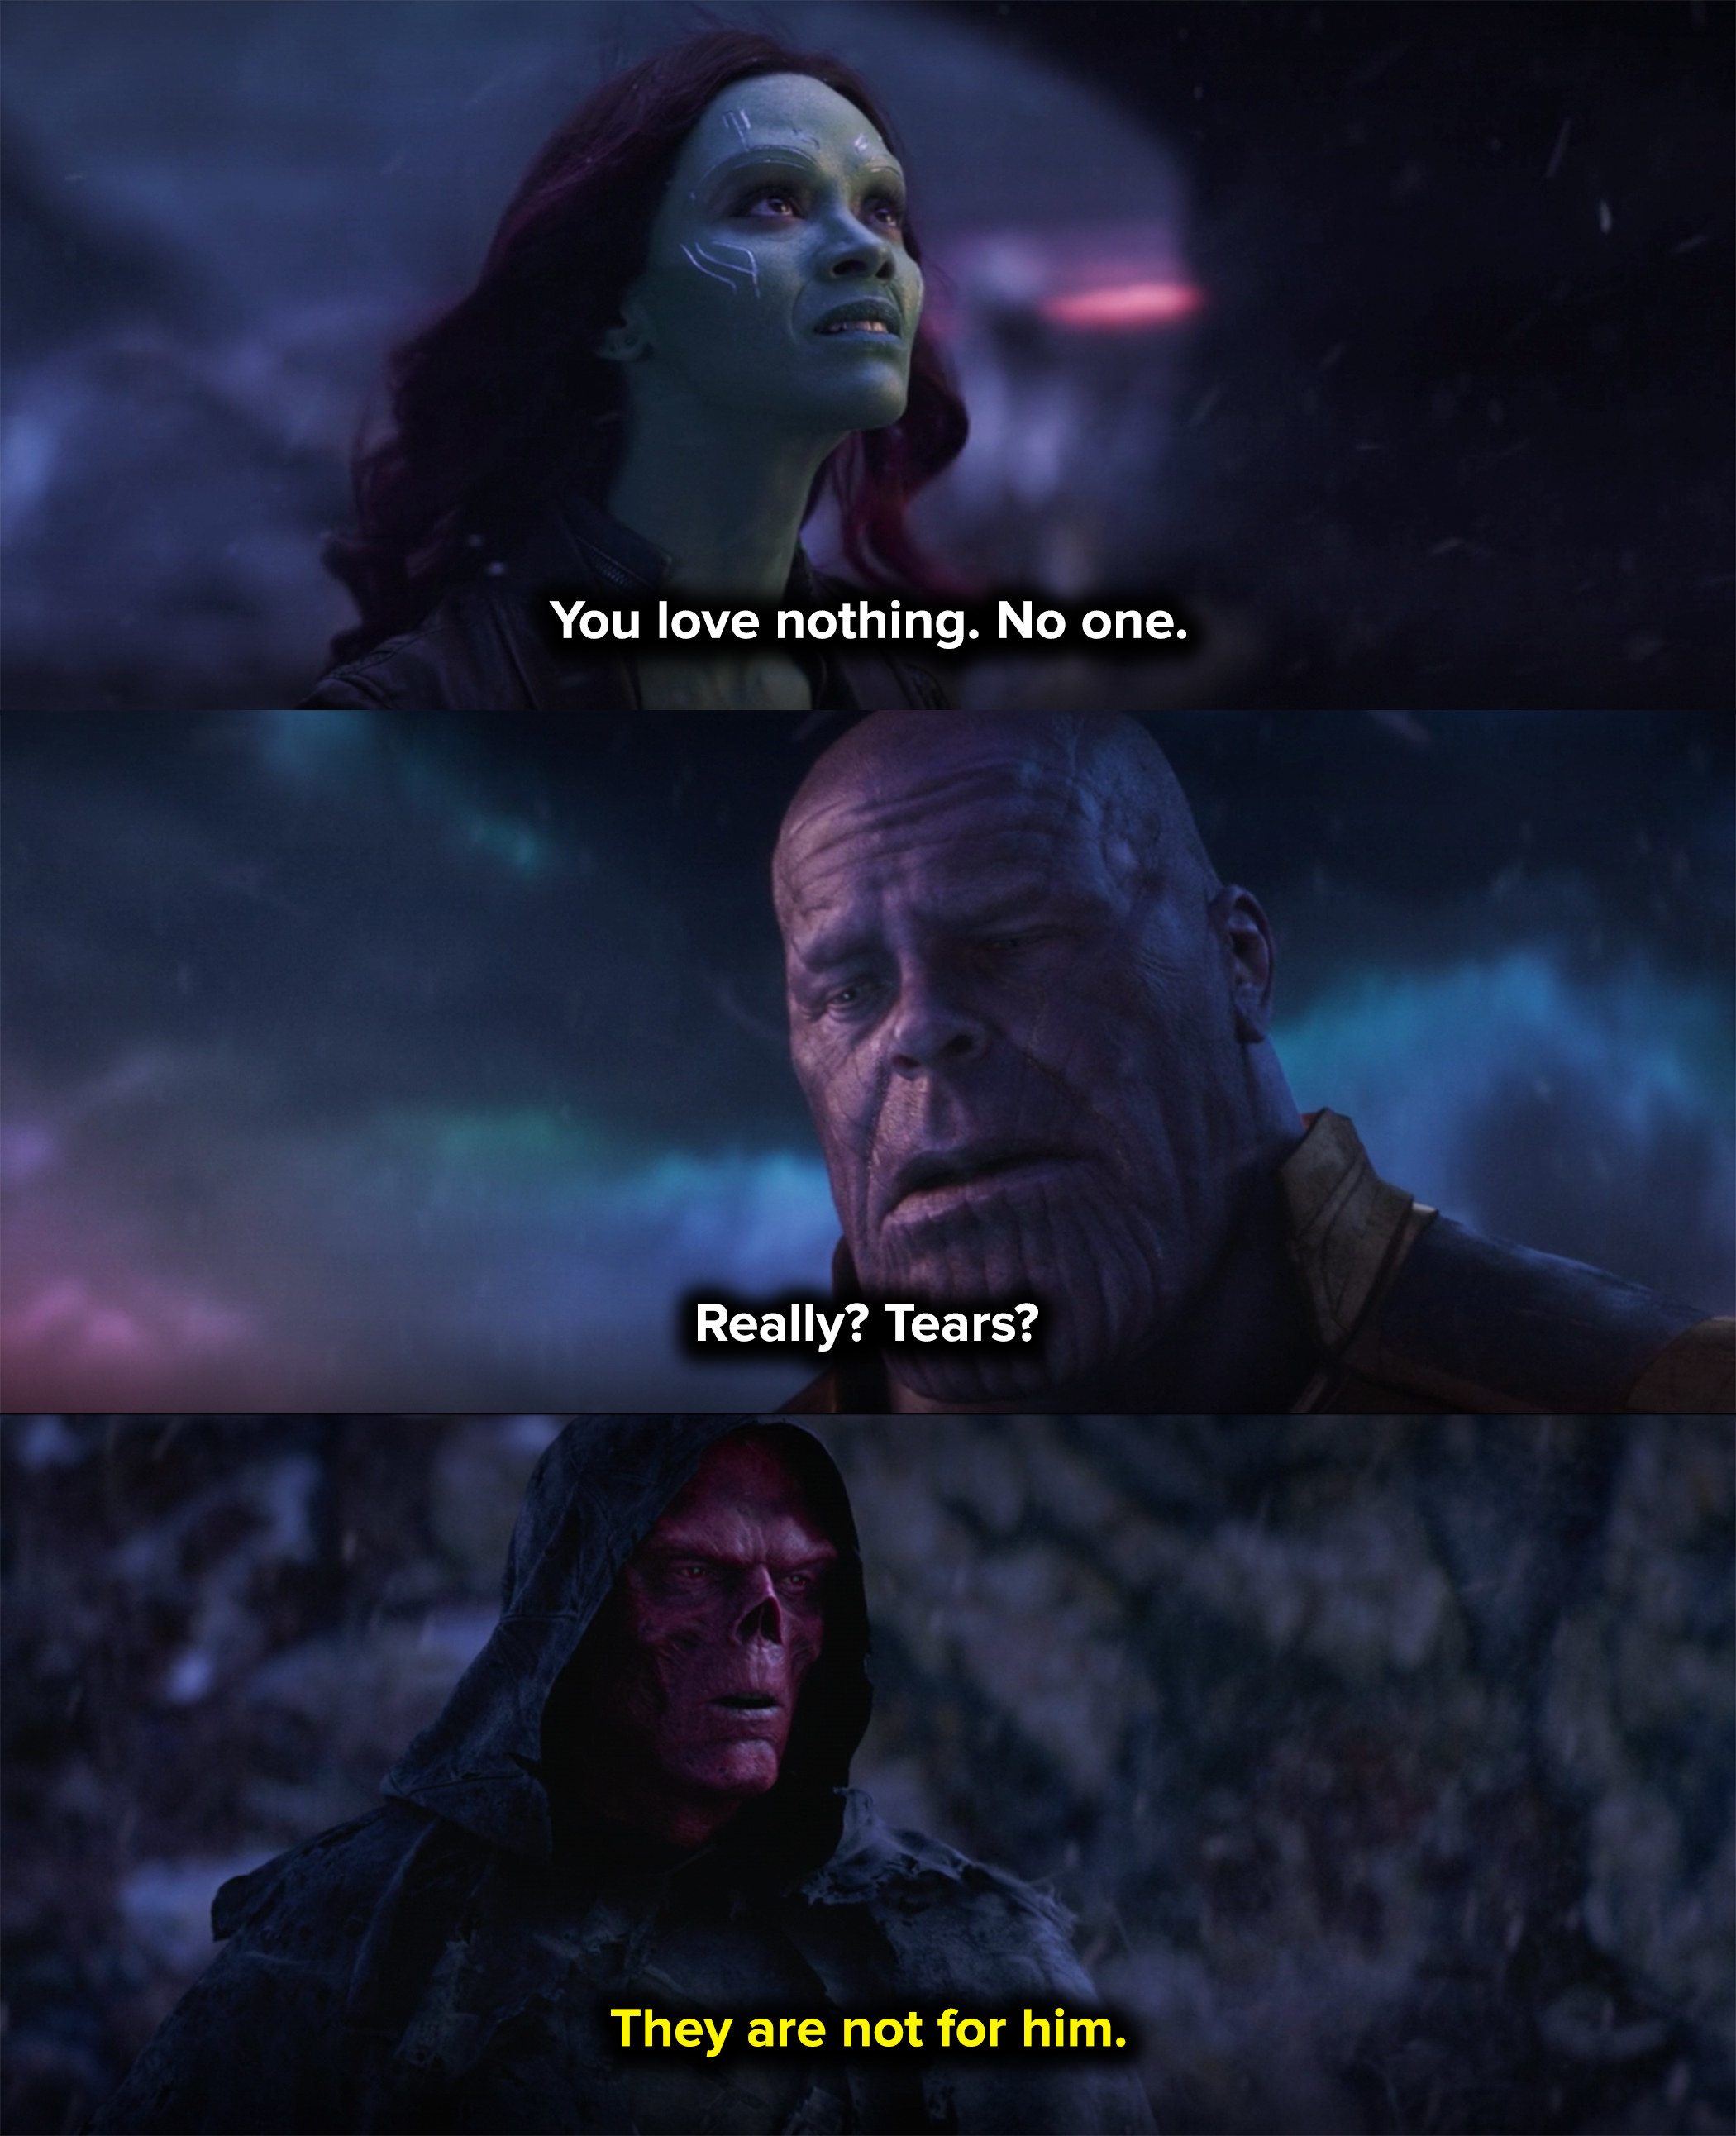 Gamora accuses Thanos of loving nothing and no one